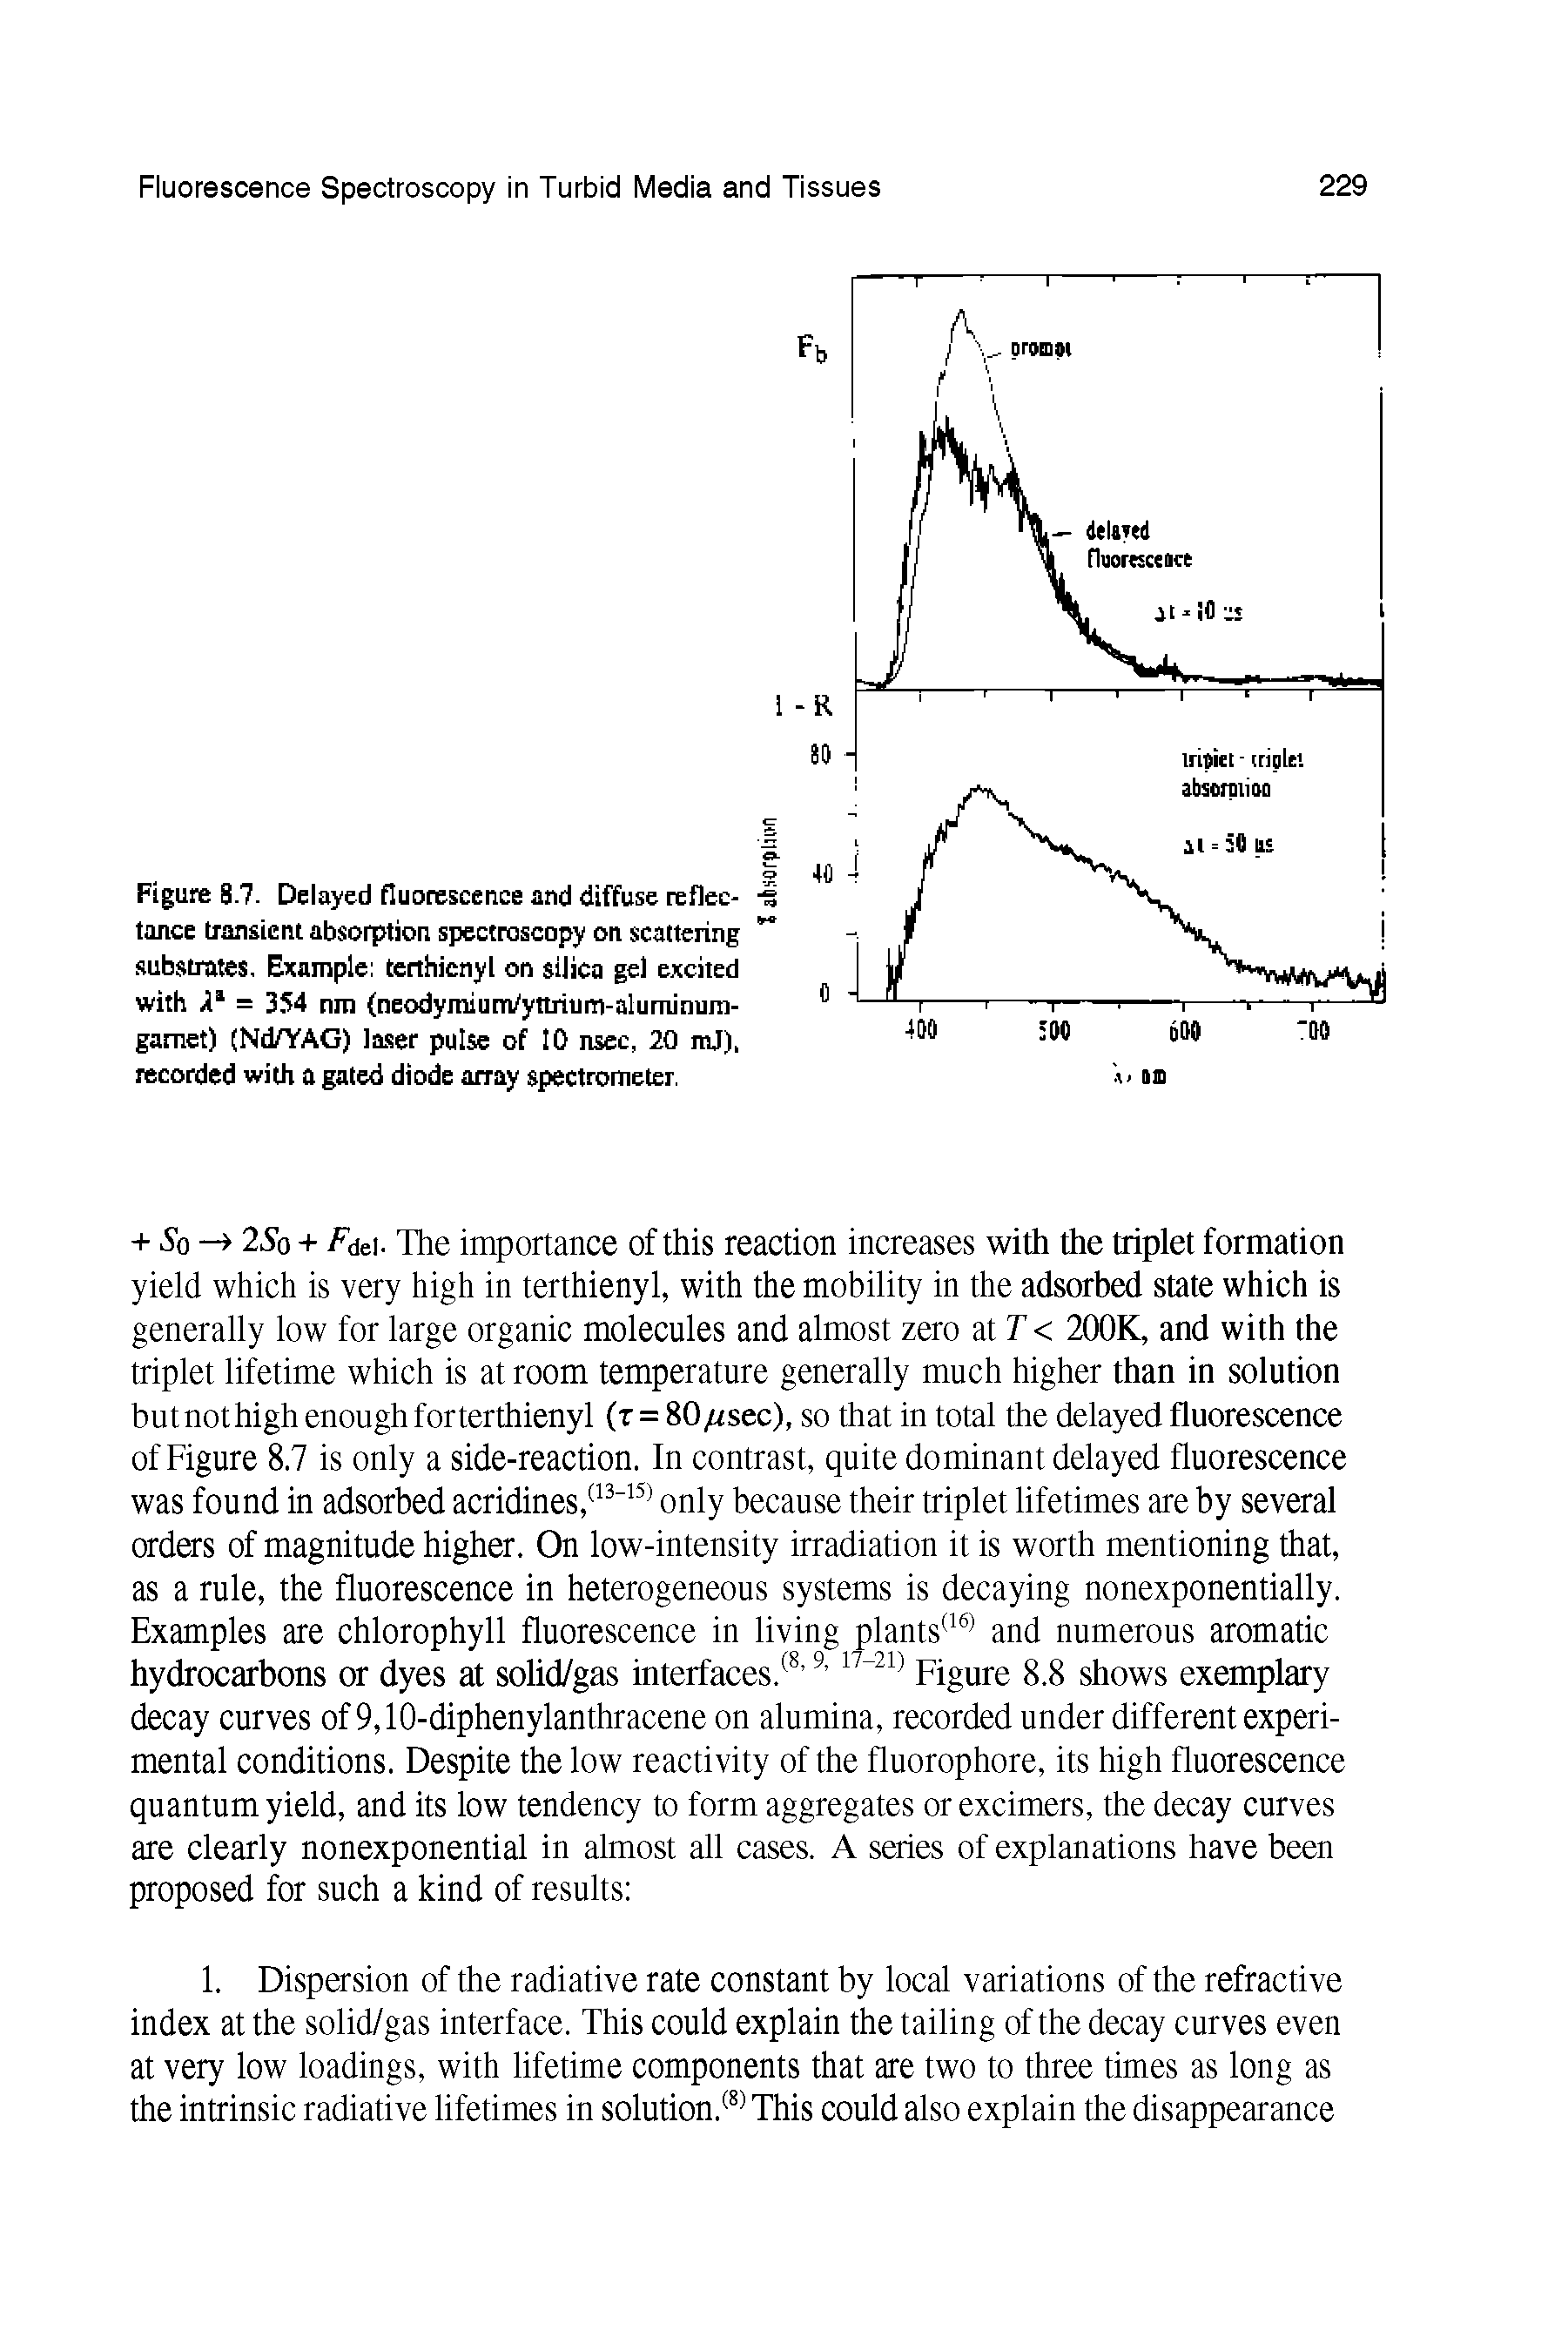 Figure 8.7. Delayed fluorescence and diffuse reflectance transient absorption spectroscopy on scattering substrates. Example terthicnyl on silica gel excited with = 354 nm (neodymium/yttrium-aluminum-garnet) (Nd/YAG) laser pulse of 10 nsec, 20 mj), recorded with a gated diode array spectrometer.